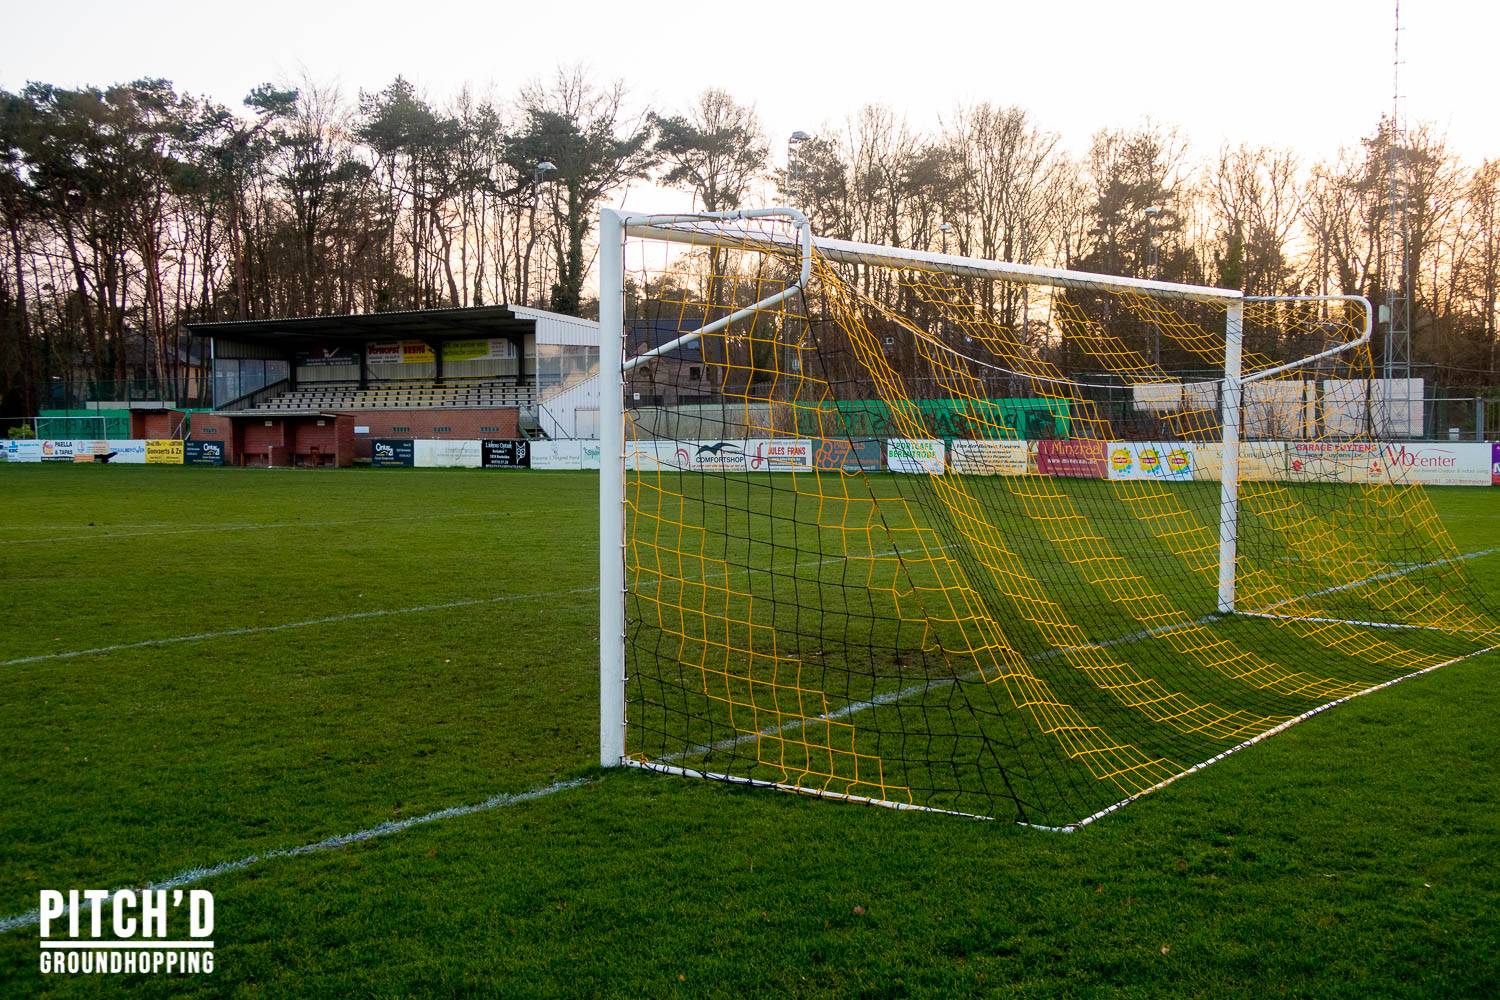 Pitch'd Groundhopping